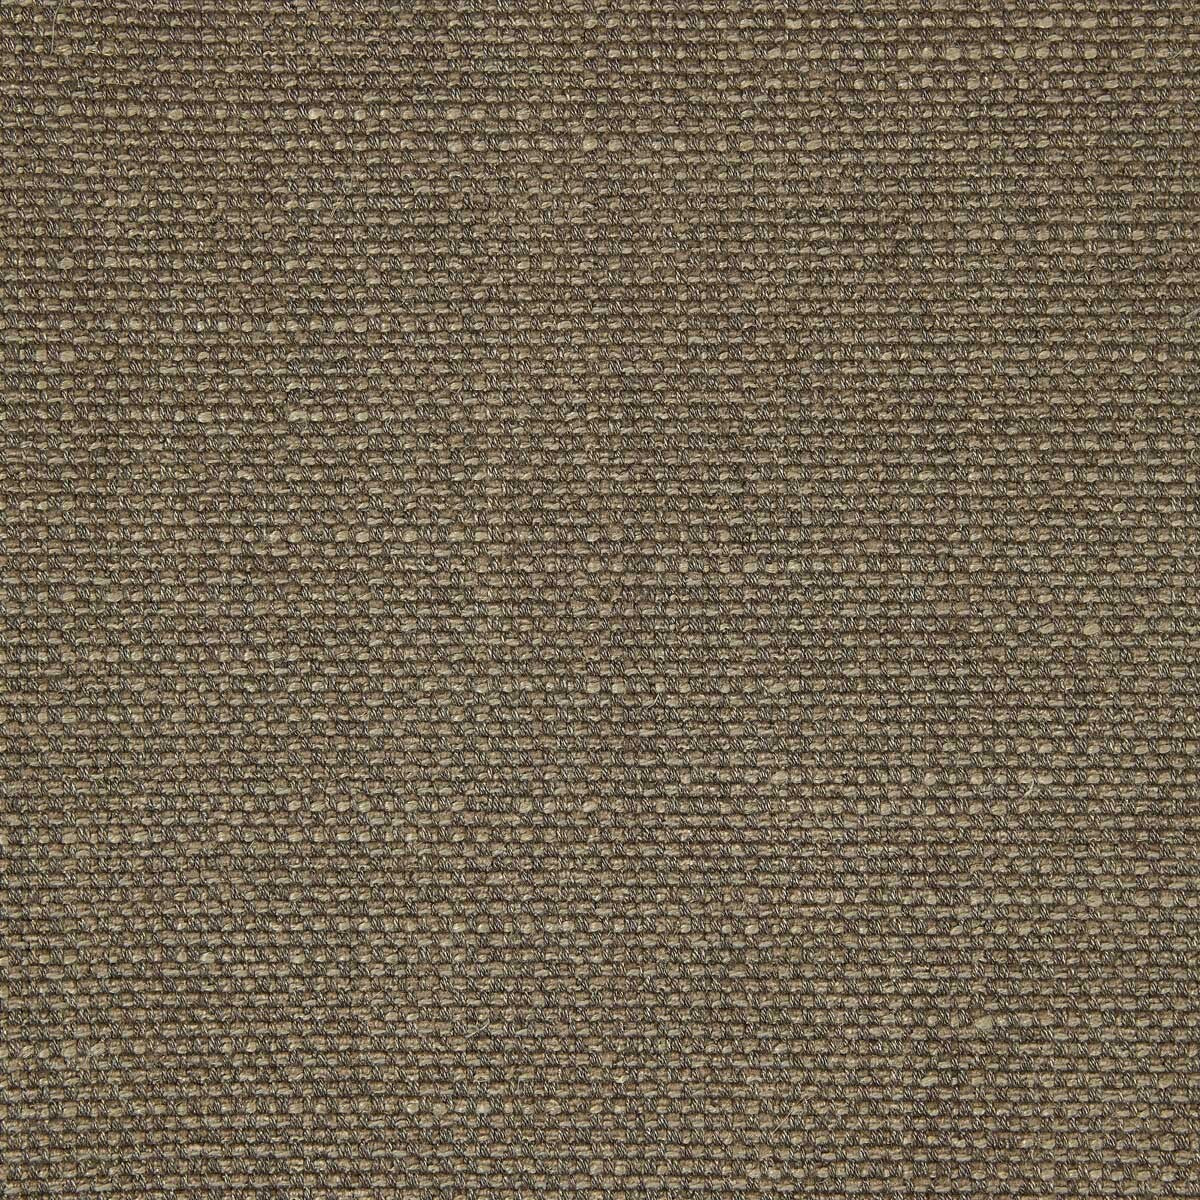 Godai fabric in 1 color - pattern LZ-30349.01.0 - by Kravet Design in the Lizzo collection